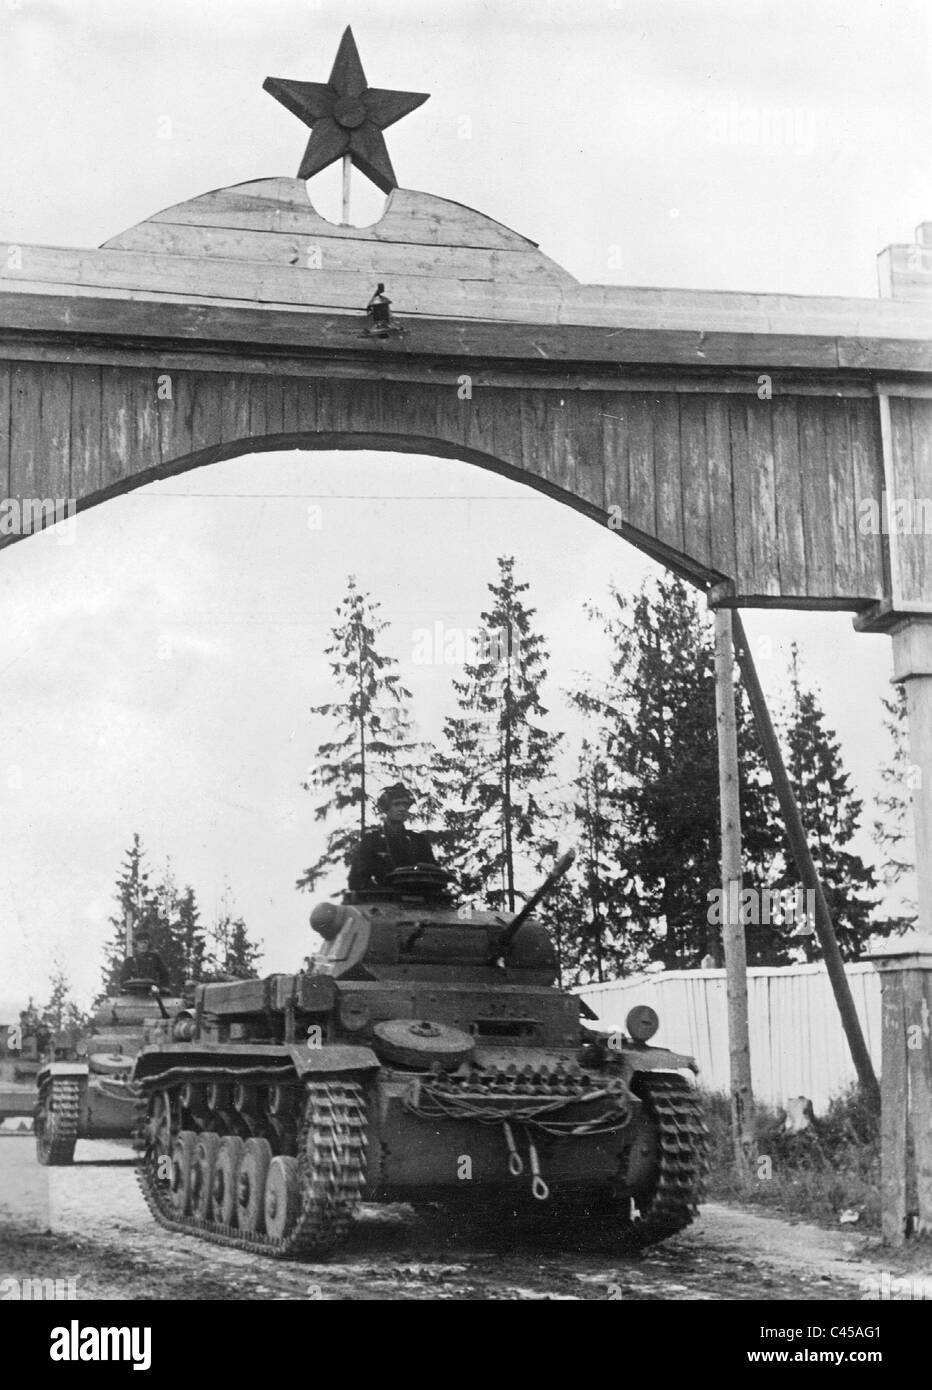 German panzer II after the attack on the Soviet Union, 1941 Stock Photo